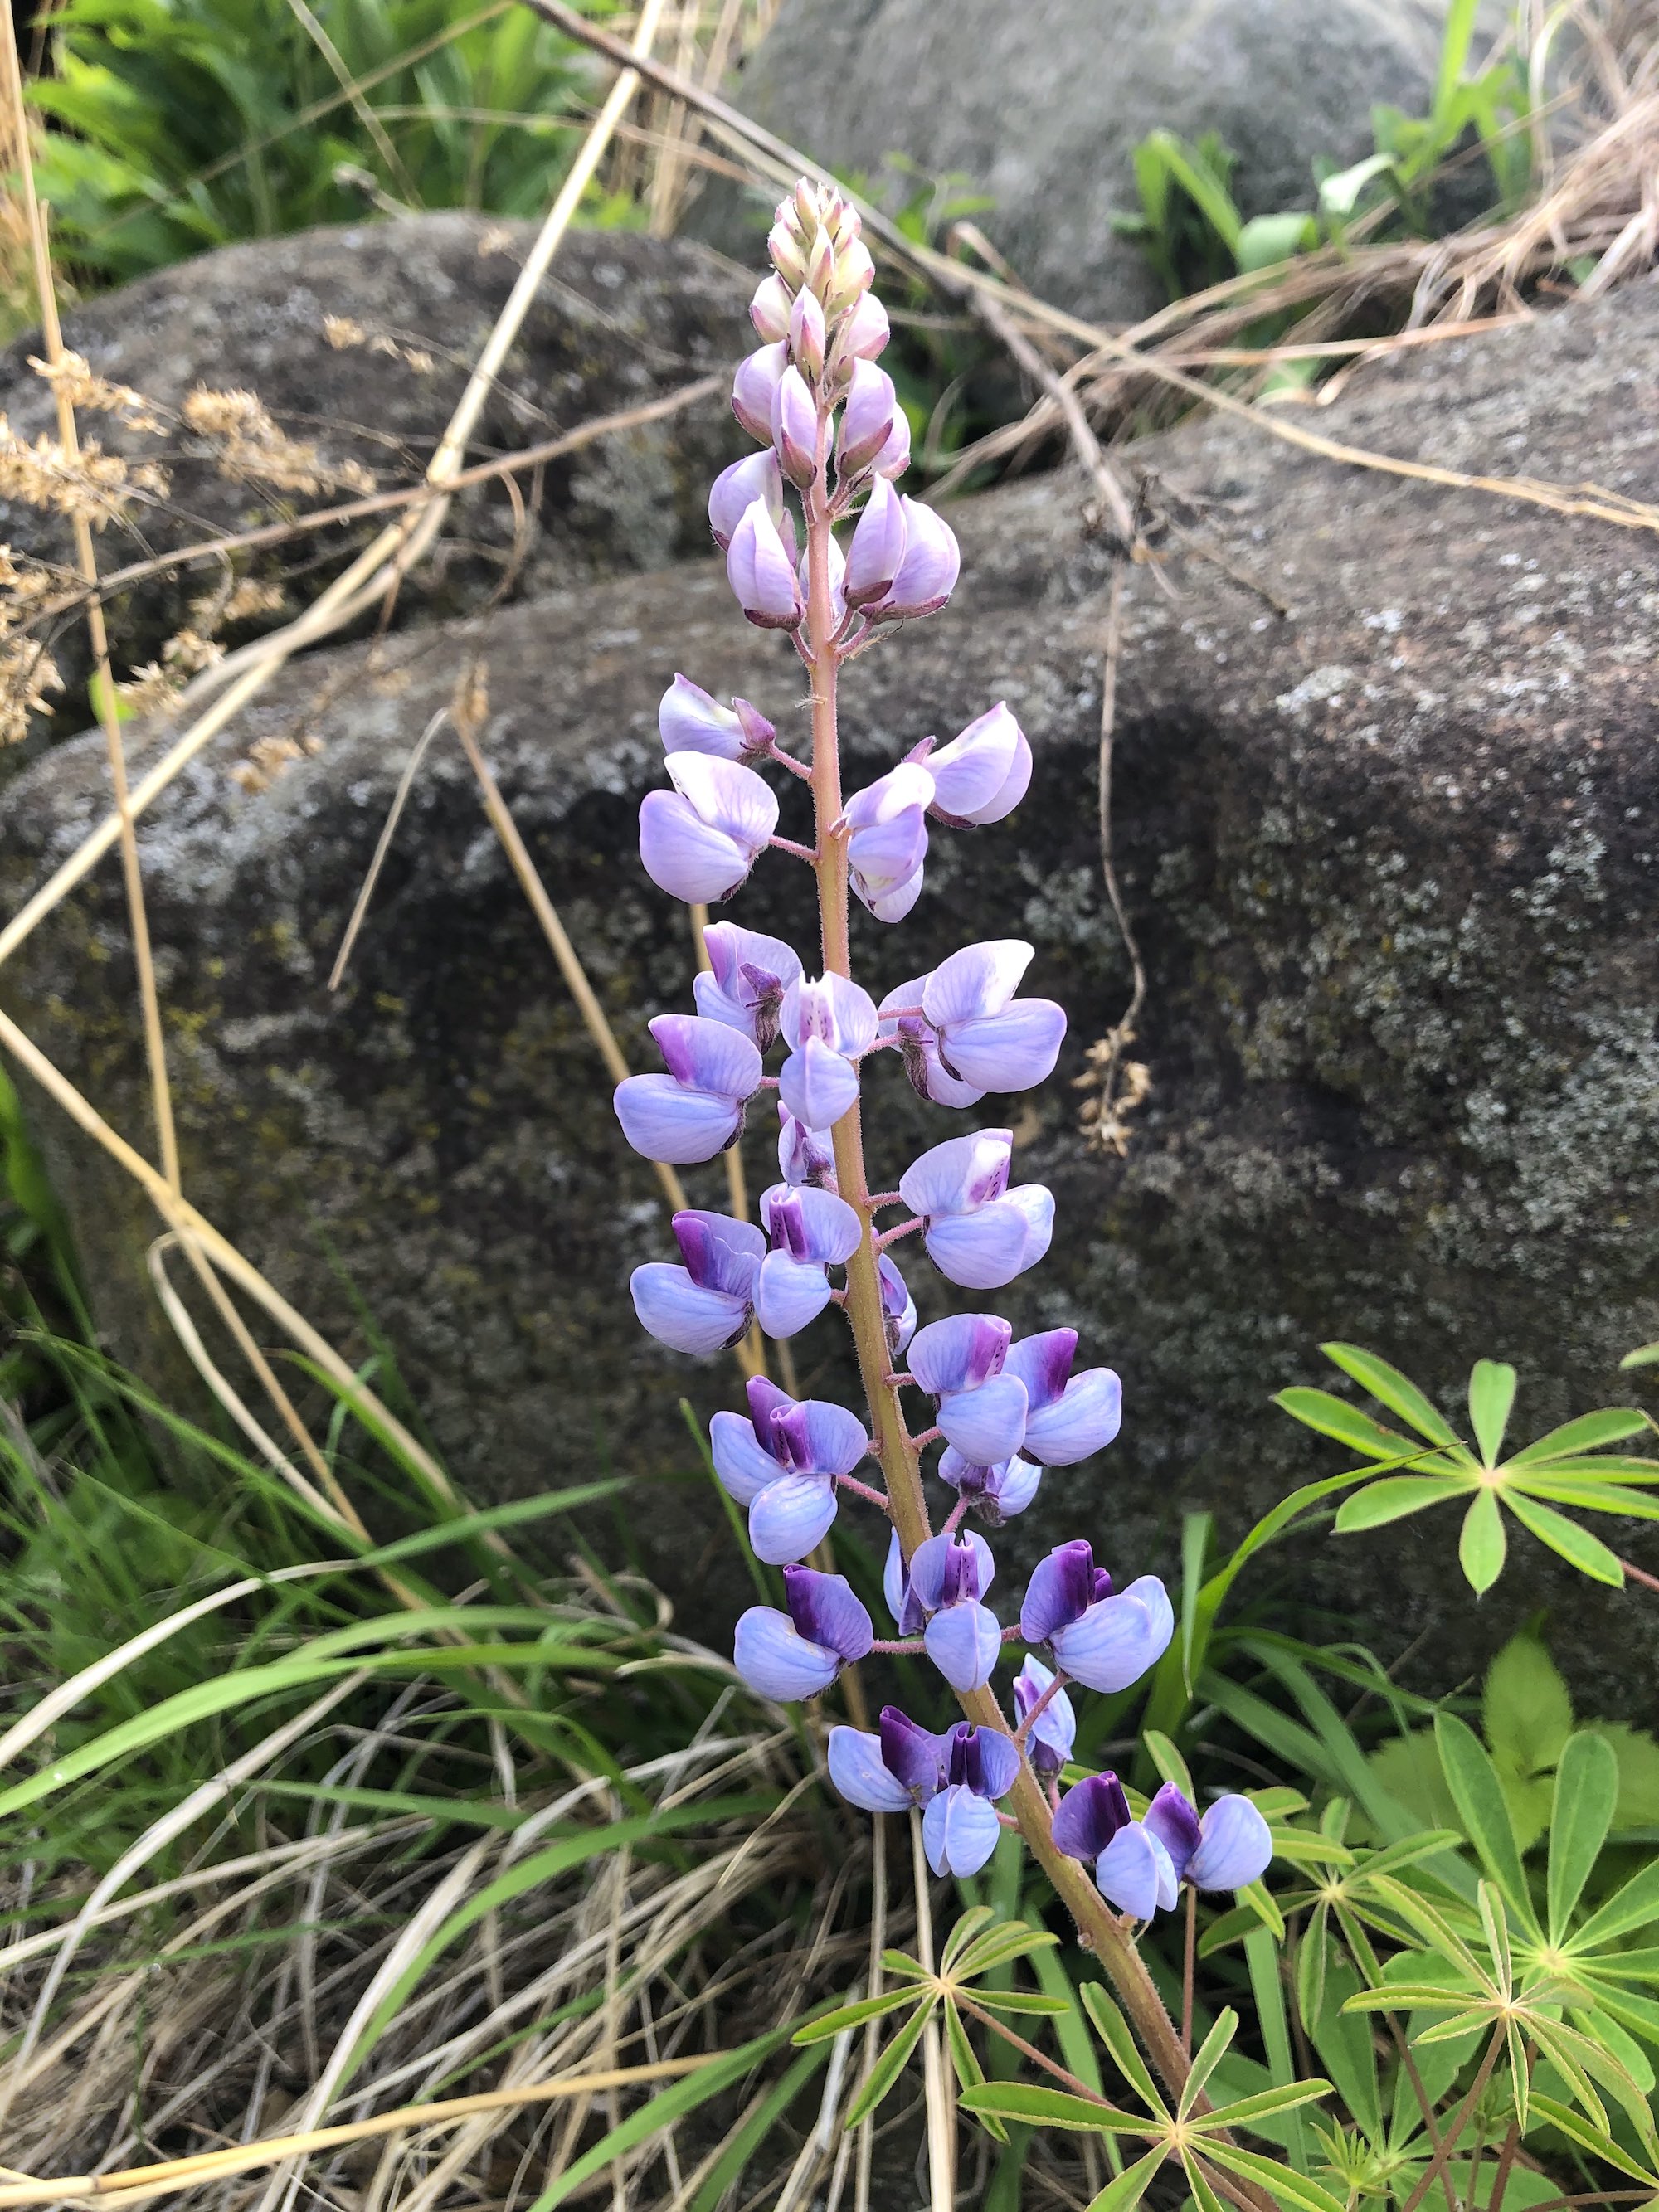 Wild Lupine next to the UW-Madison Arboretum Visitor Center in Madison, Wisconsin on May 17, 2021.